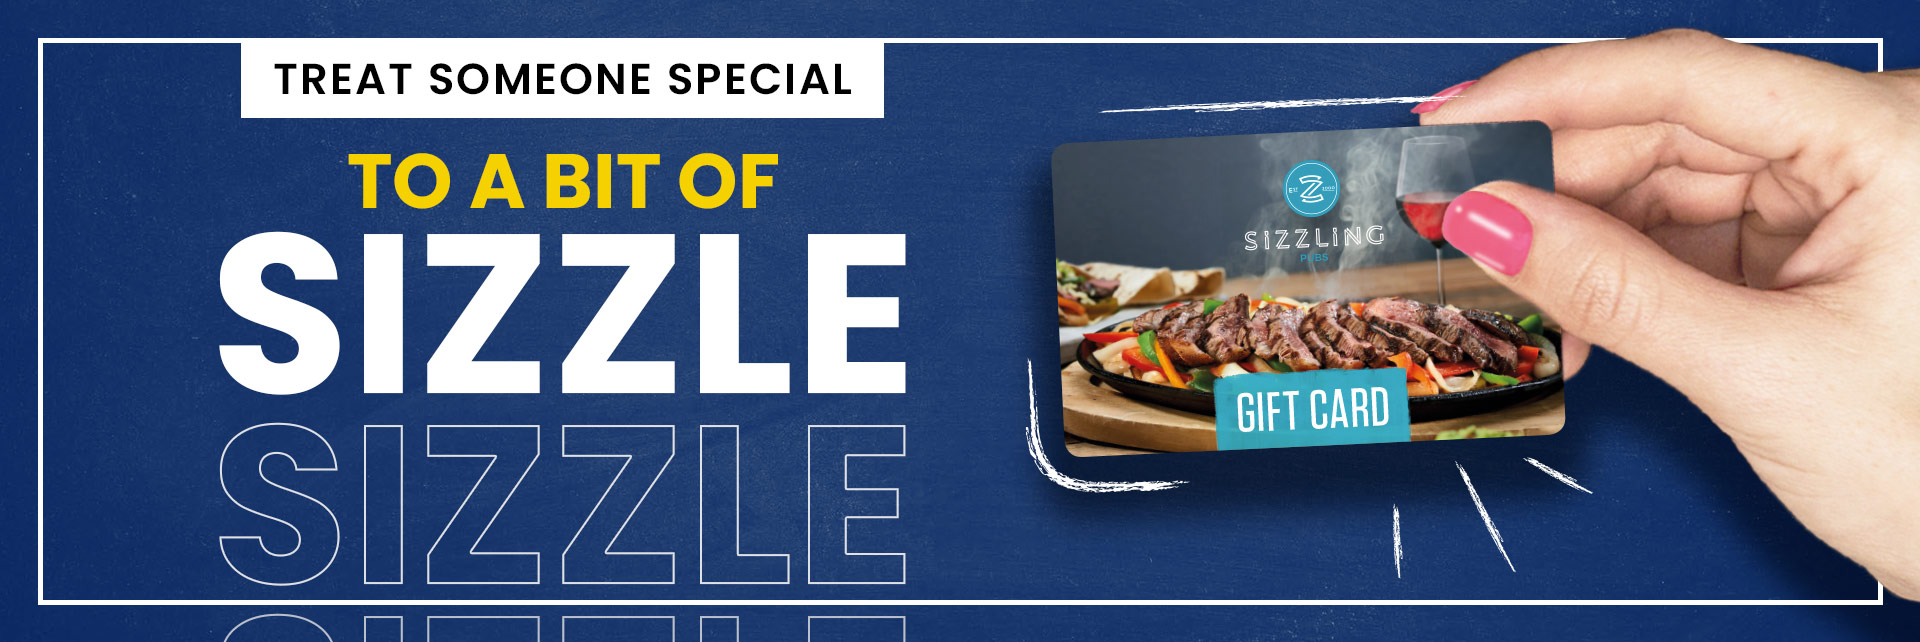 Sizzling Pubs Gift Card at The Painted Lady in Coventry